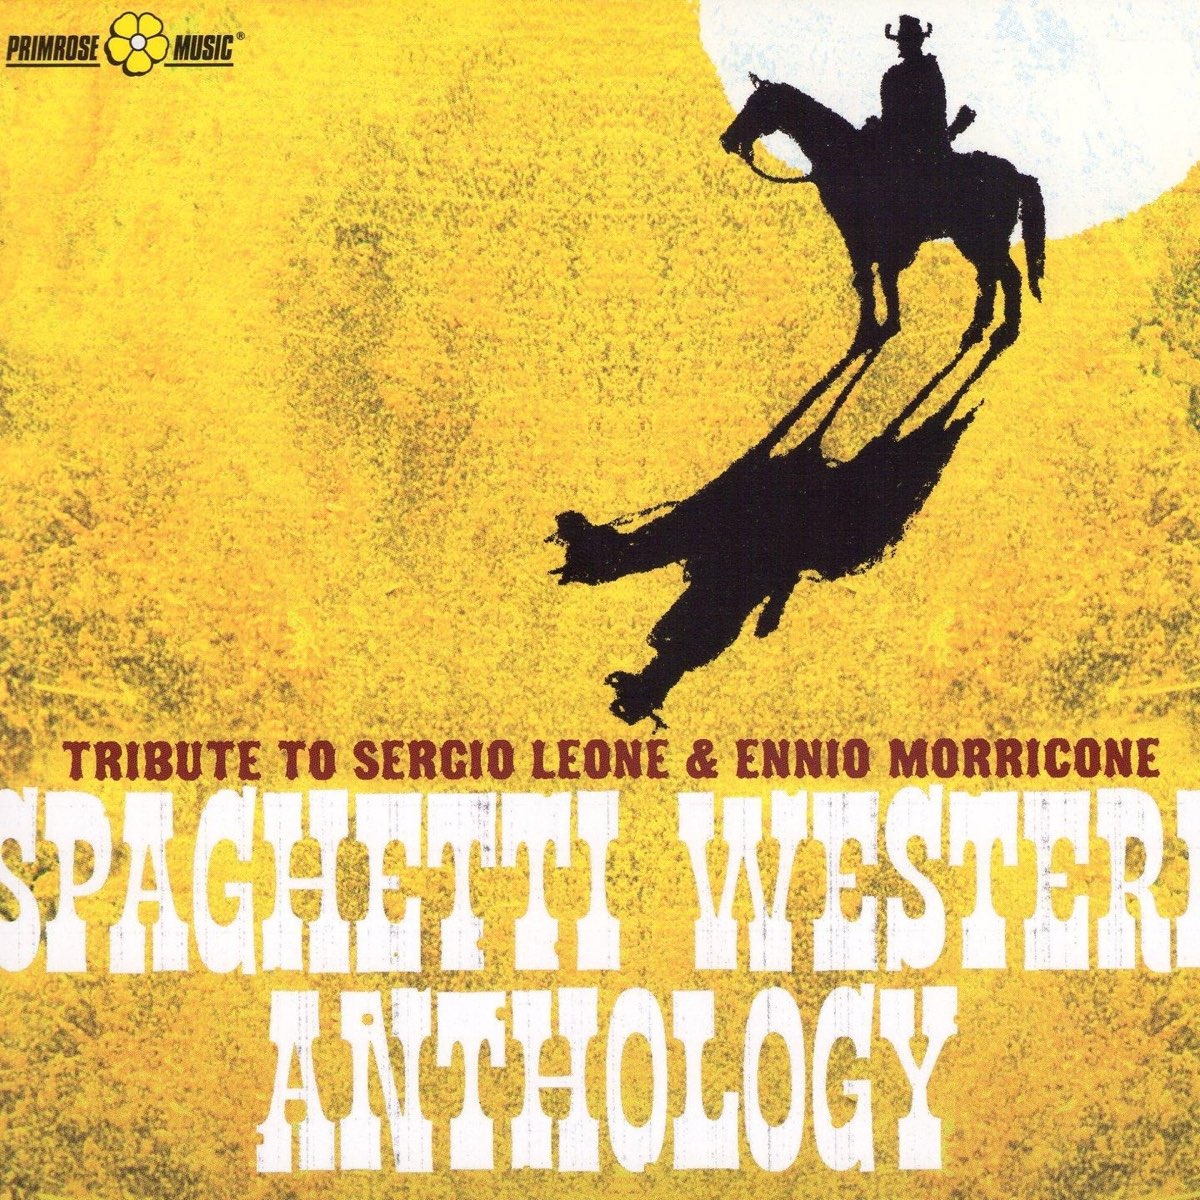 Spaghetti Western Anthology (Tribute To Sergio Leone & Ennio Morricone) by  Various Artists on Apple Music